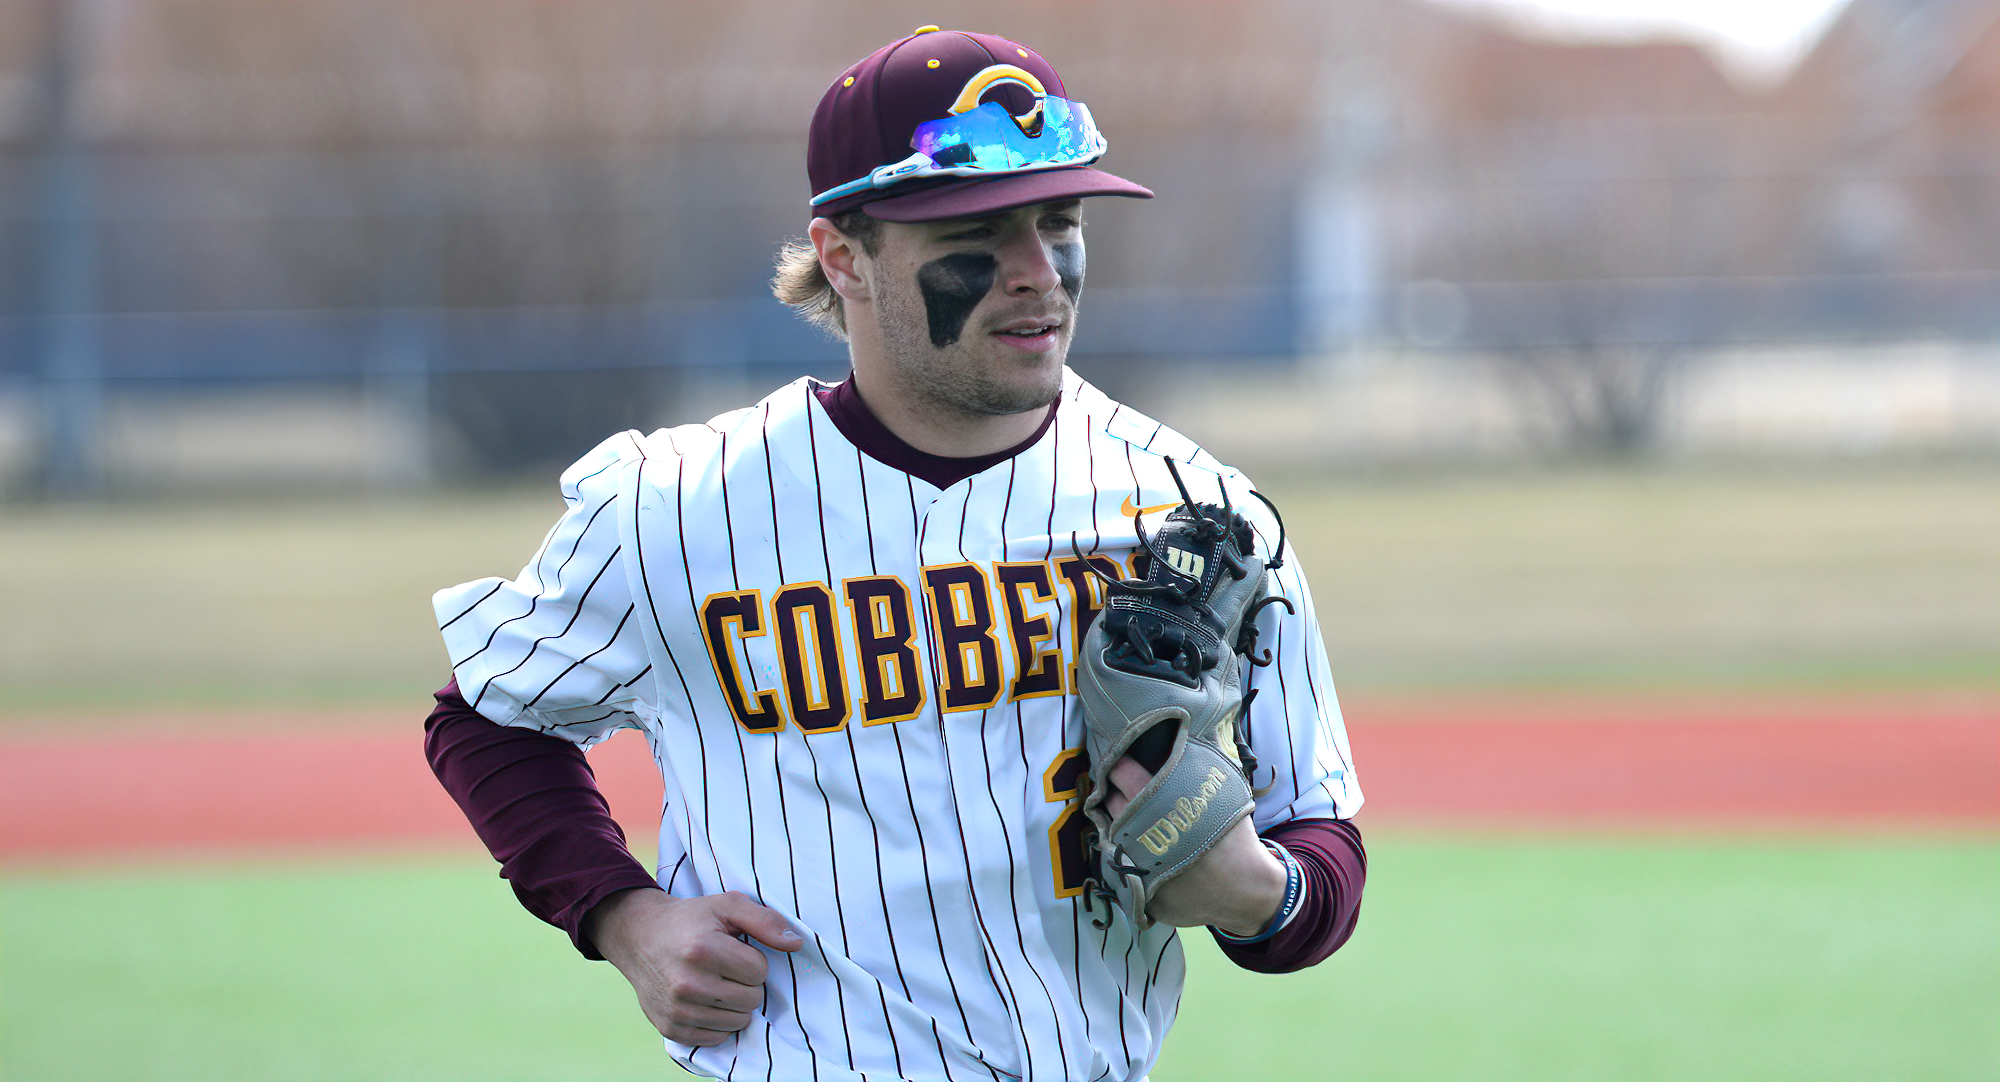 David Dorsey went 4-for-4 with a home run and two RBI in the Cobbers' series opener at Neb. Wesleyan.